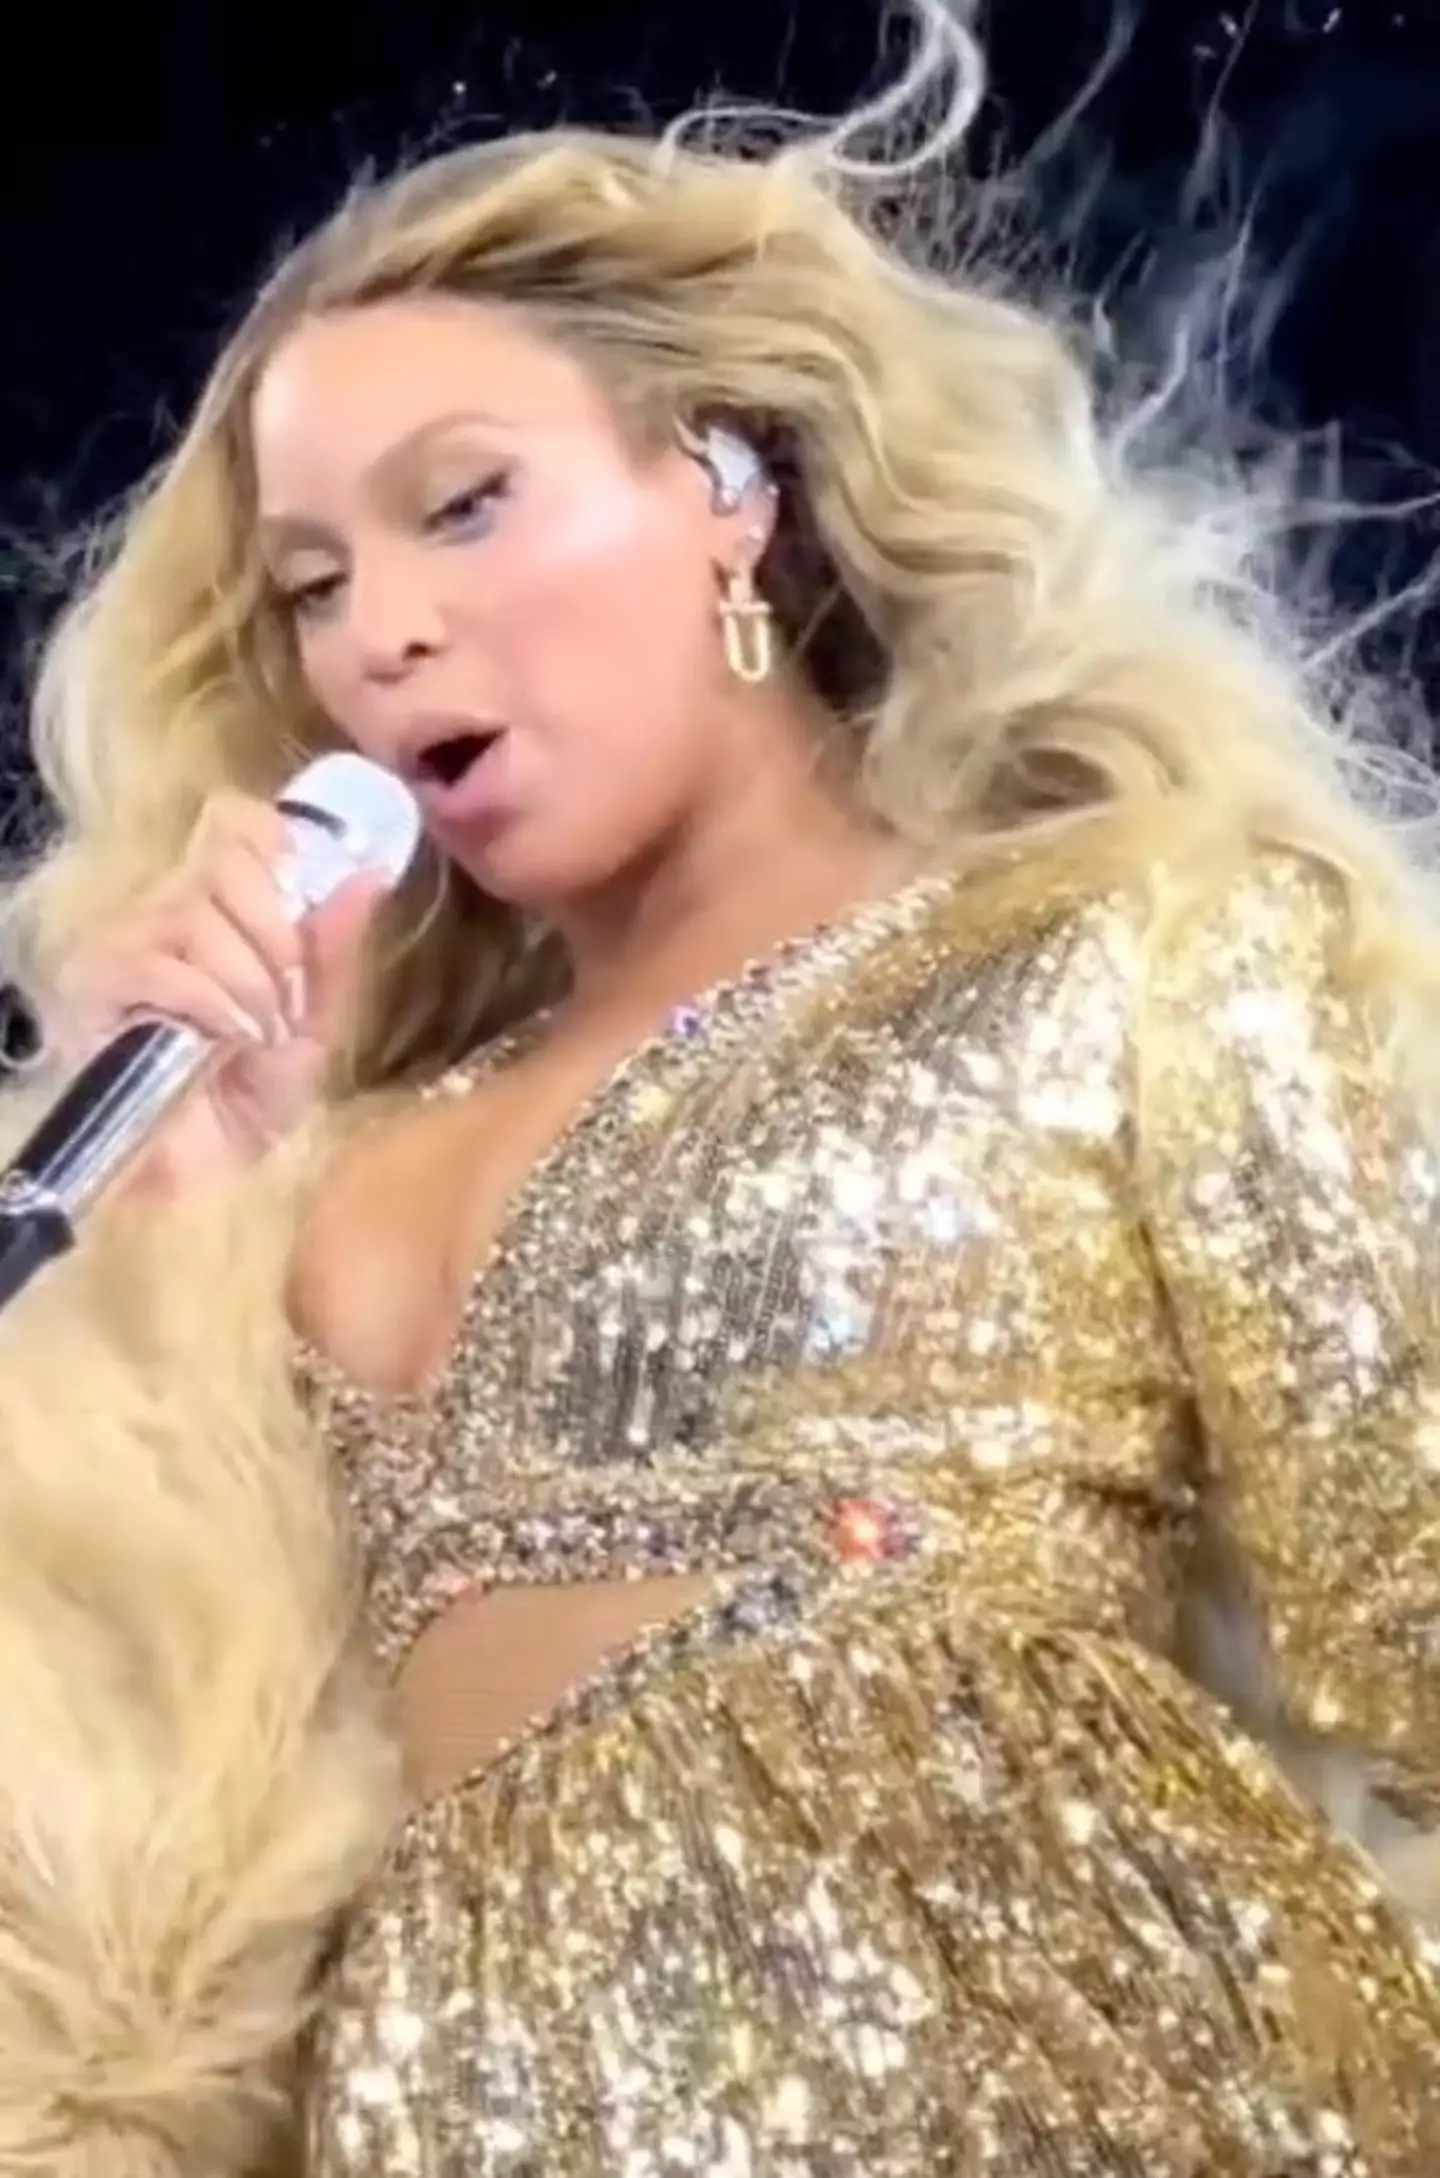 Beyoncé has reincluded Lizzo’s name during her live performance.